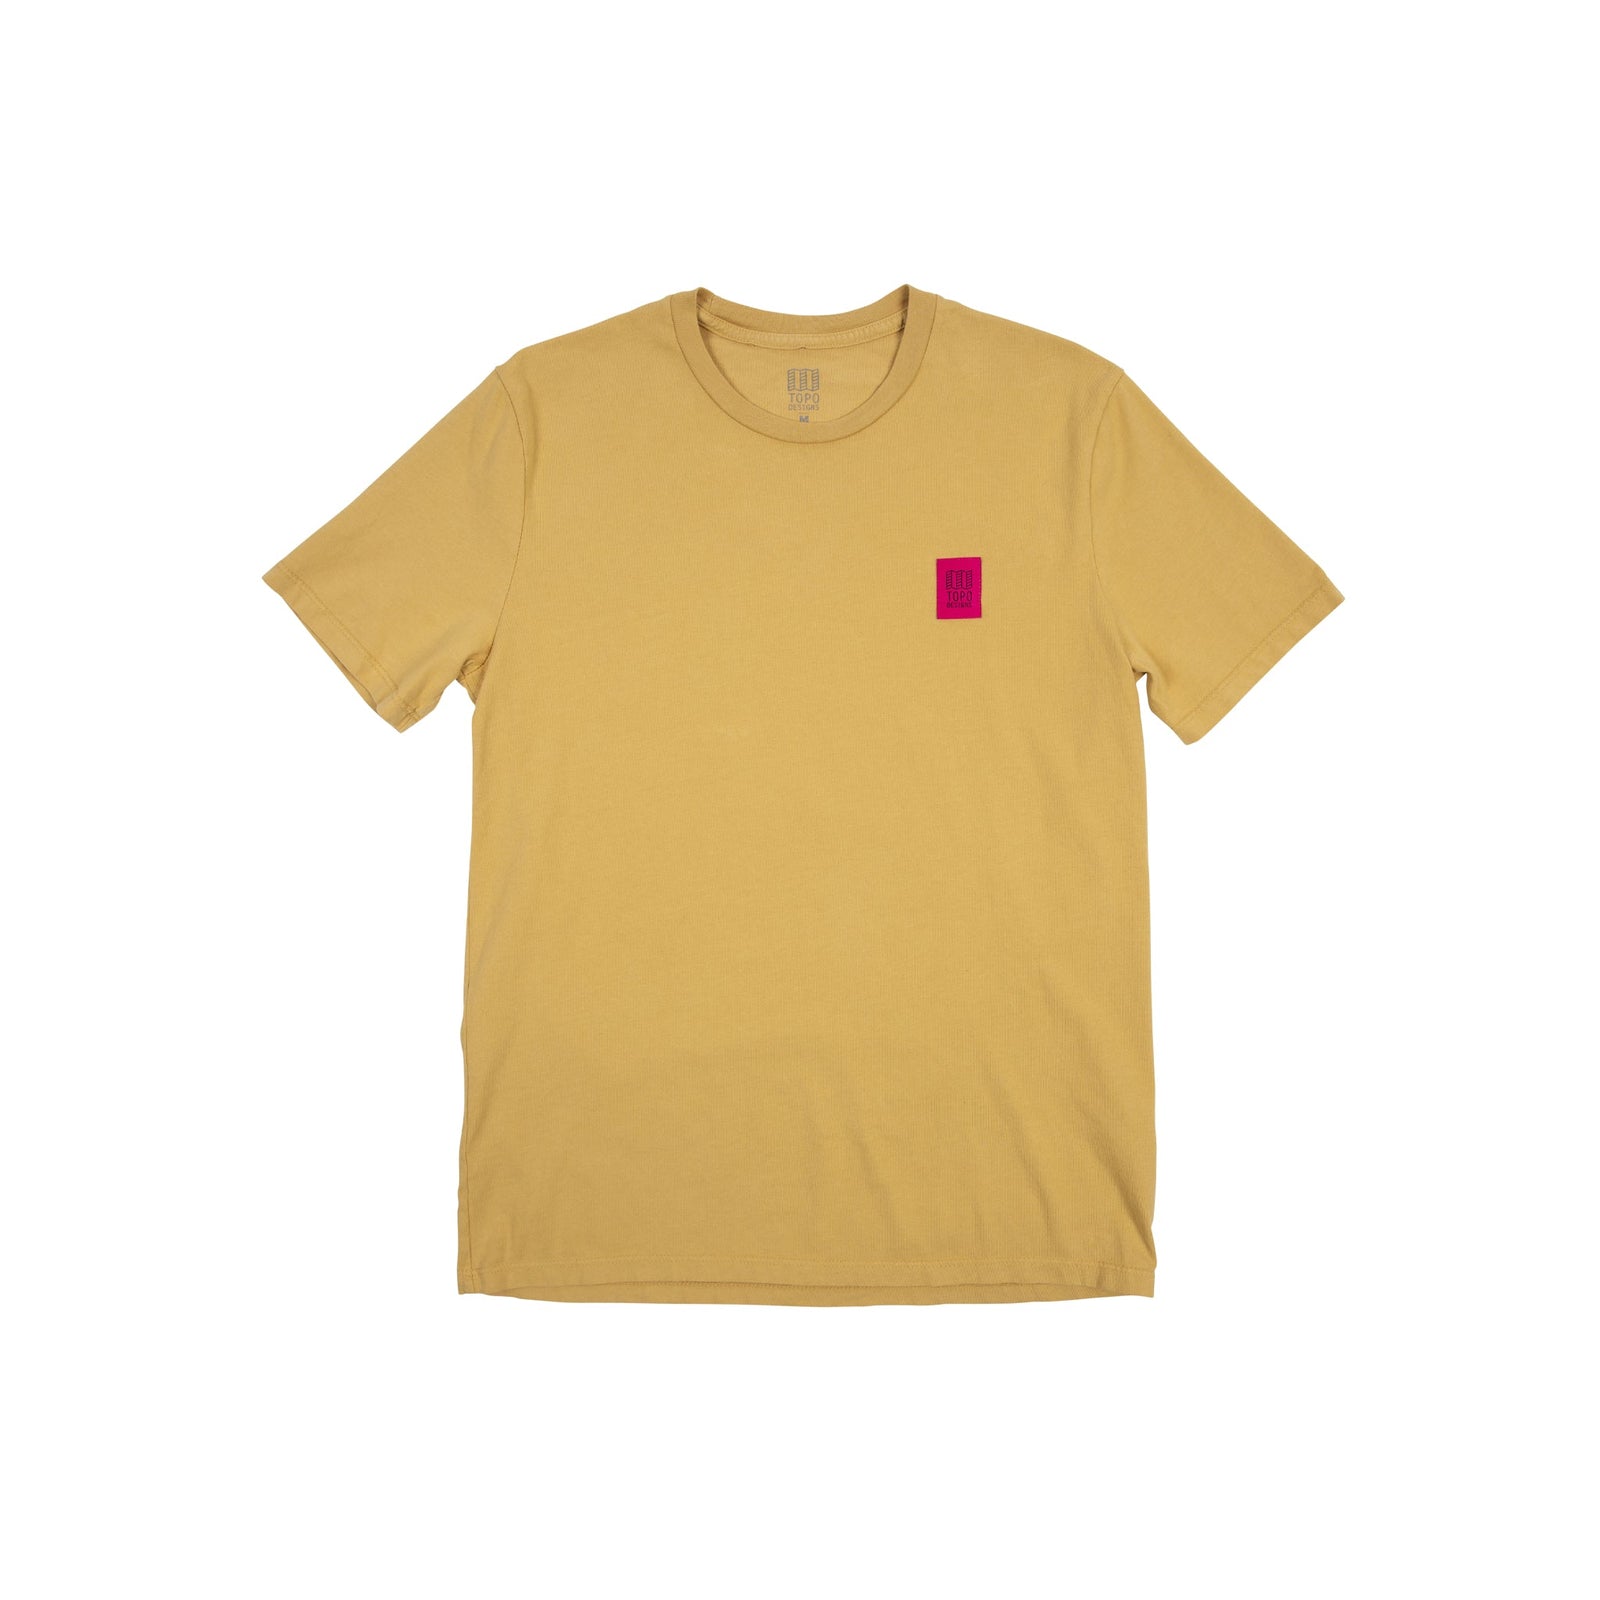 Front product shot of Topo Designs Men's Label short sleeve t-shirt in tan "Brown".